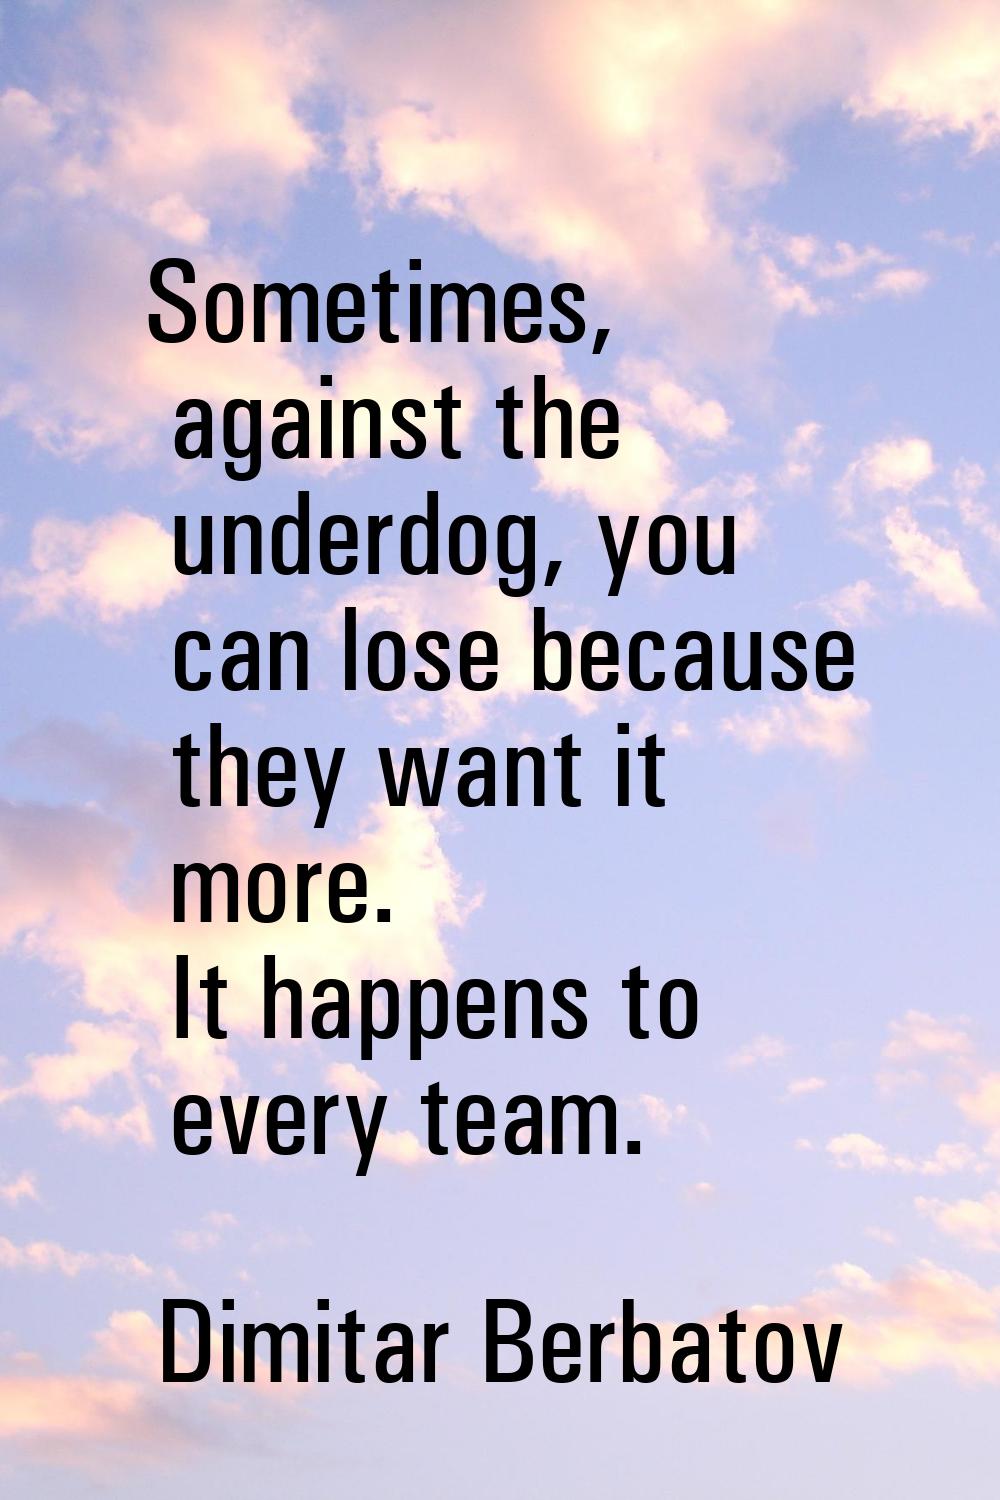 Sometimes, against the underdog, you can lose because they want it more. It happens to every team.